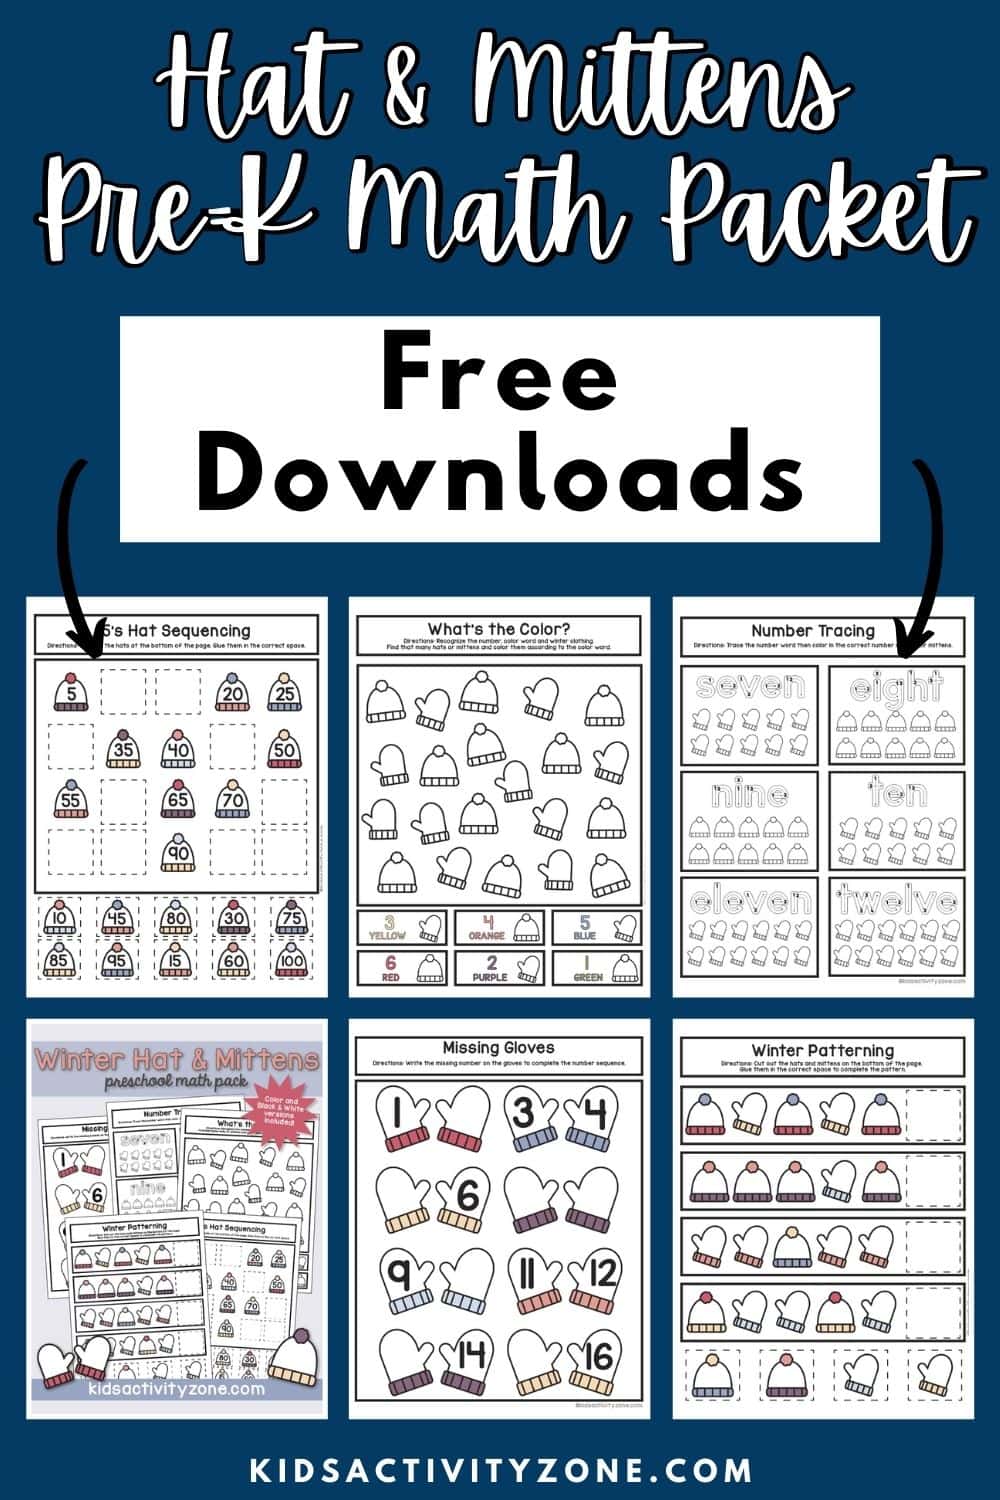 Free Preschool Math Worksheets with a fun Hats & Mittens theme perfect for winter fun. This free math packet download will have children practice counting, coloring, cutting, patterns and more! Grab your free download of these pre-k math worksheets for your classroom or at home use today!